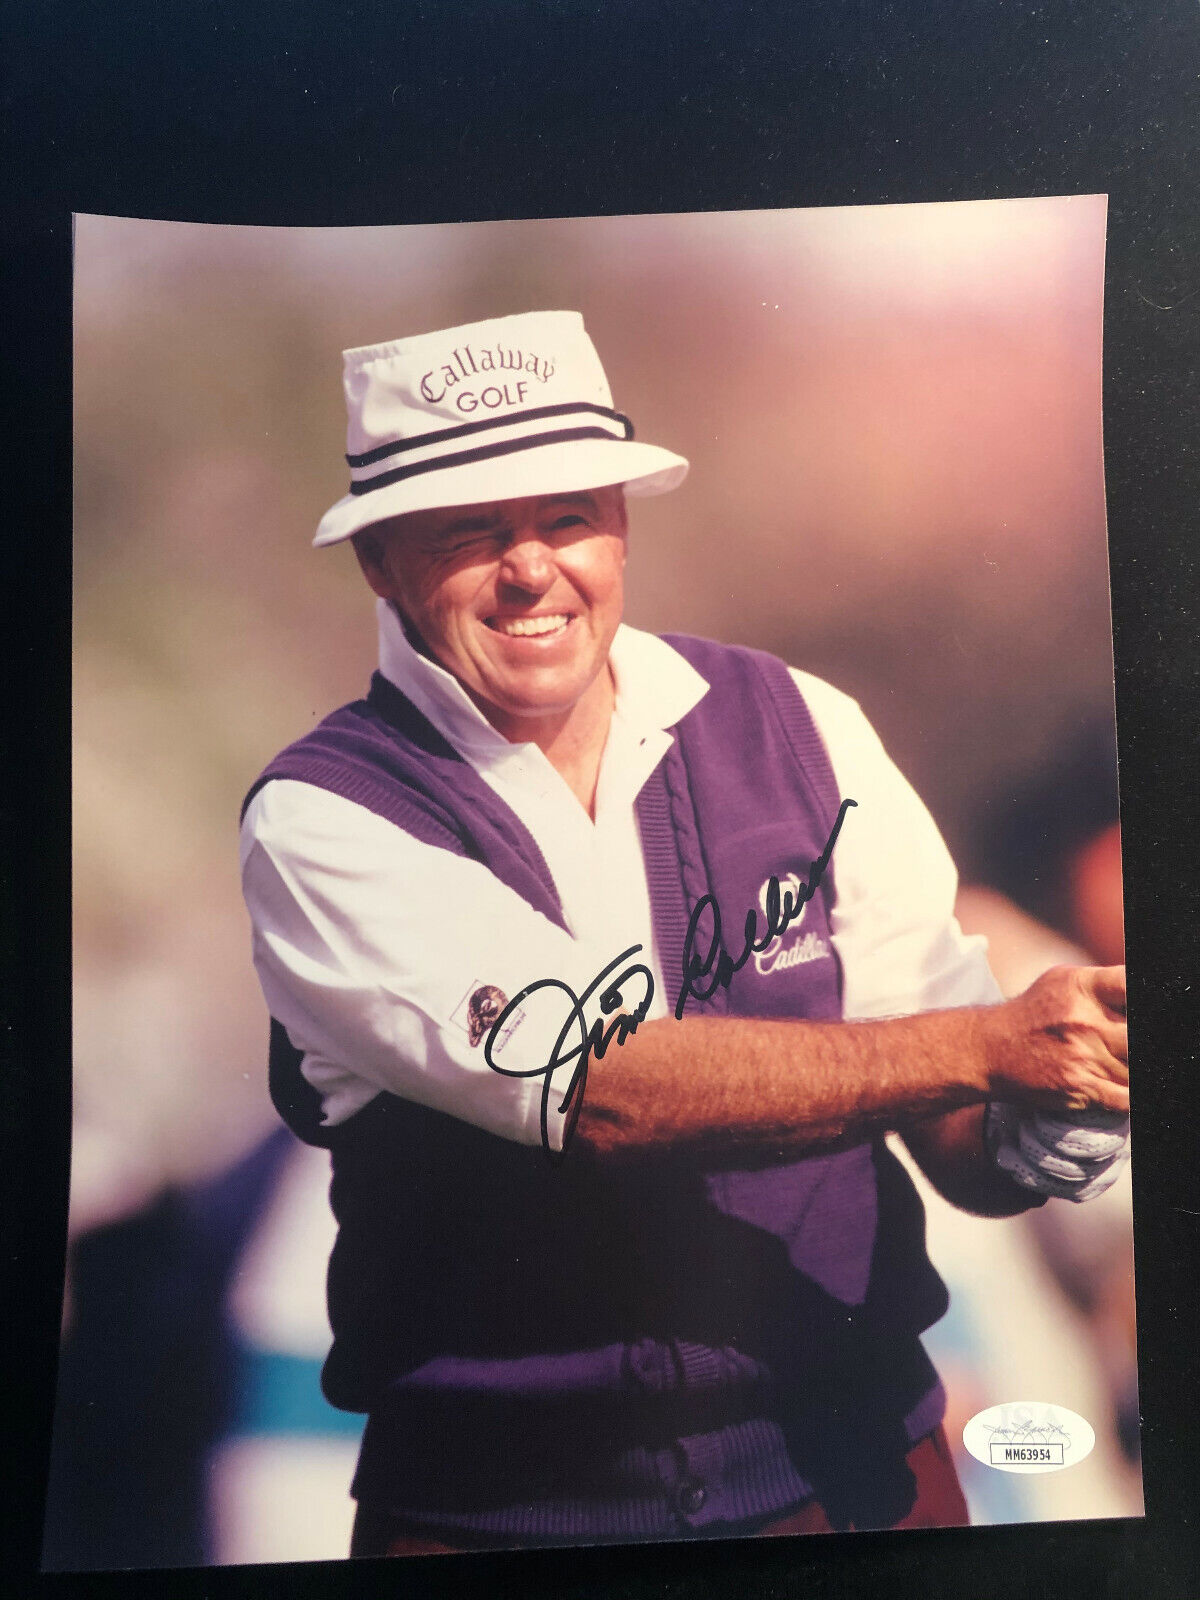 Jim Colbert Signed Autographed Photo Poster painting - PGA Golf Champion - JSA Authenticated